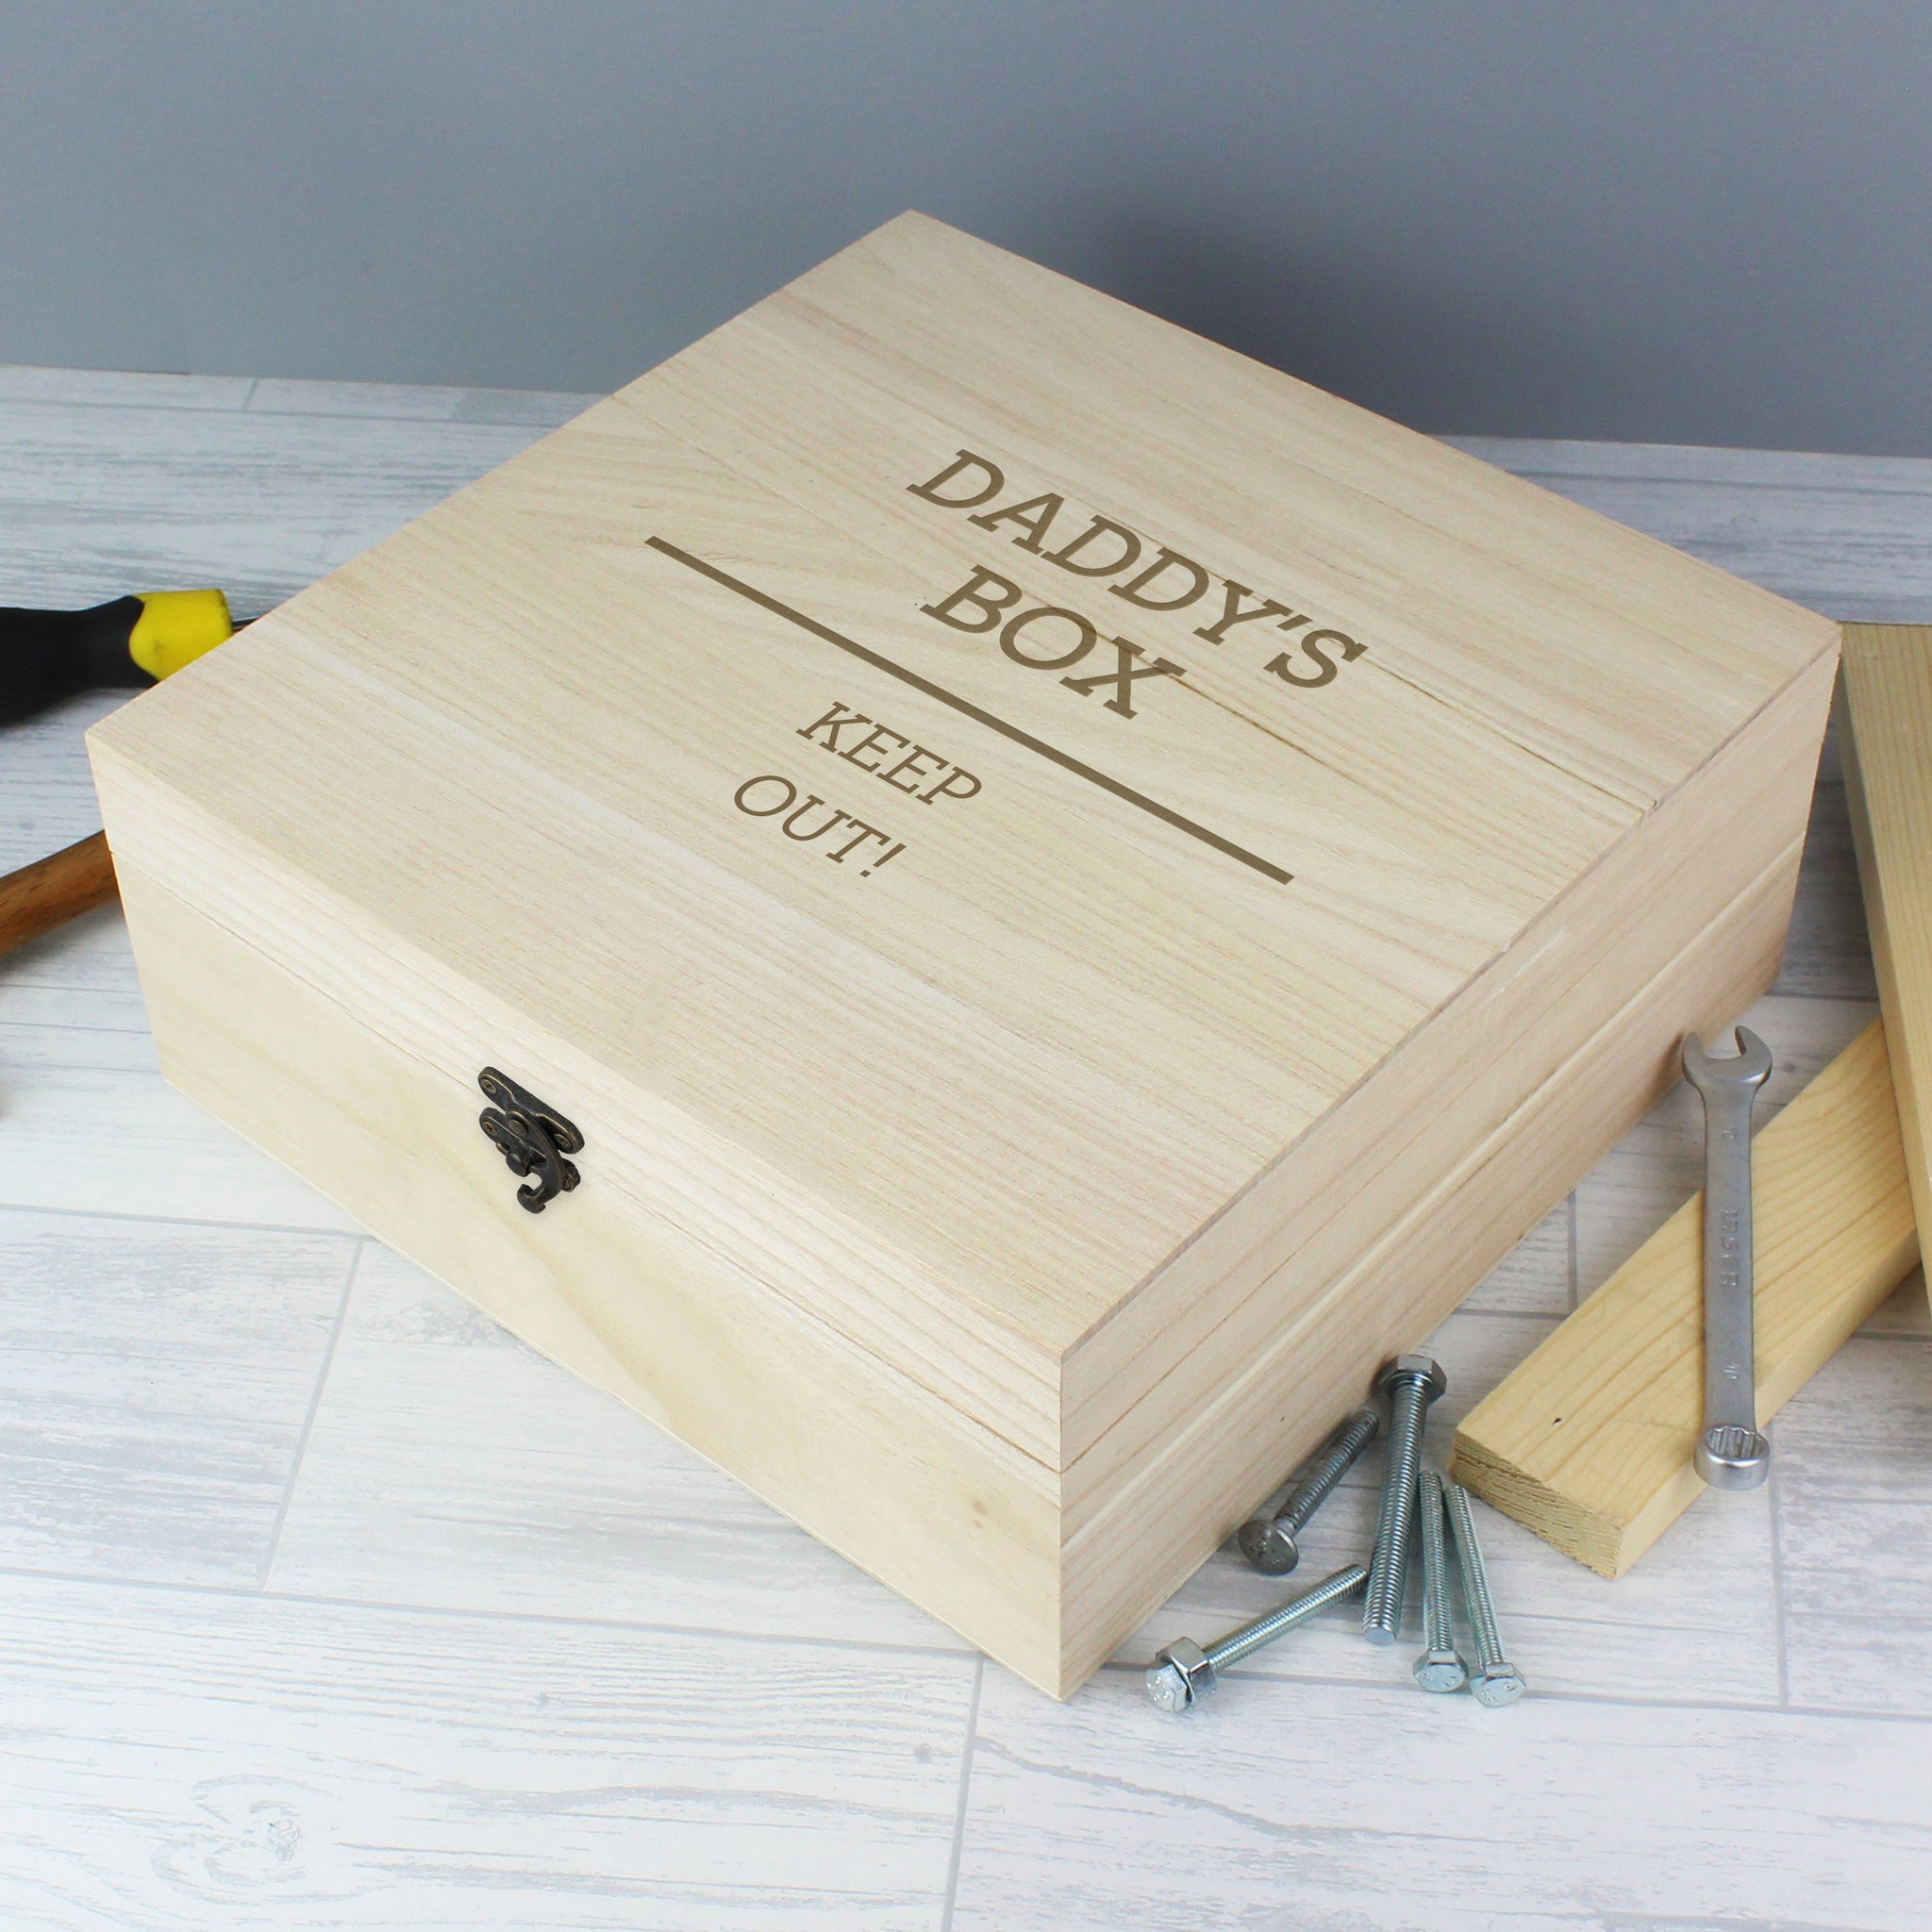 Quirky wooden keepsake box to keep clutter at bay or store those special keepsakes featuring a metal clasp and hinges.  The box can be personalised with 2 lines of text with up to 15 characters per line (above the line) and 2 lines of text with up to 25 characters per line (below the line).